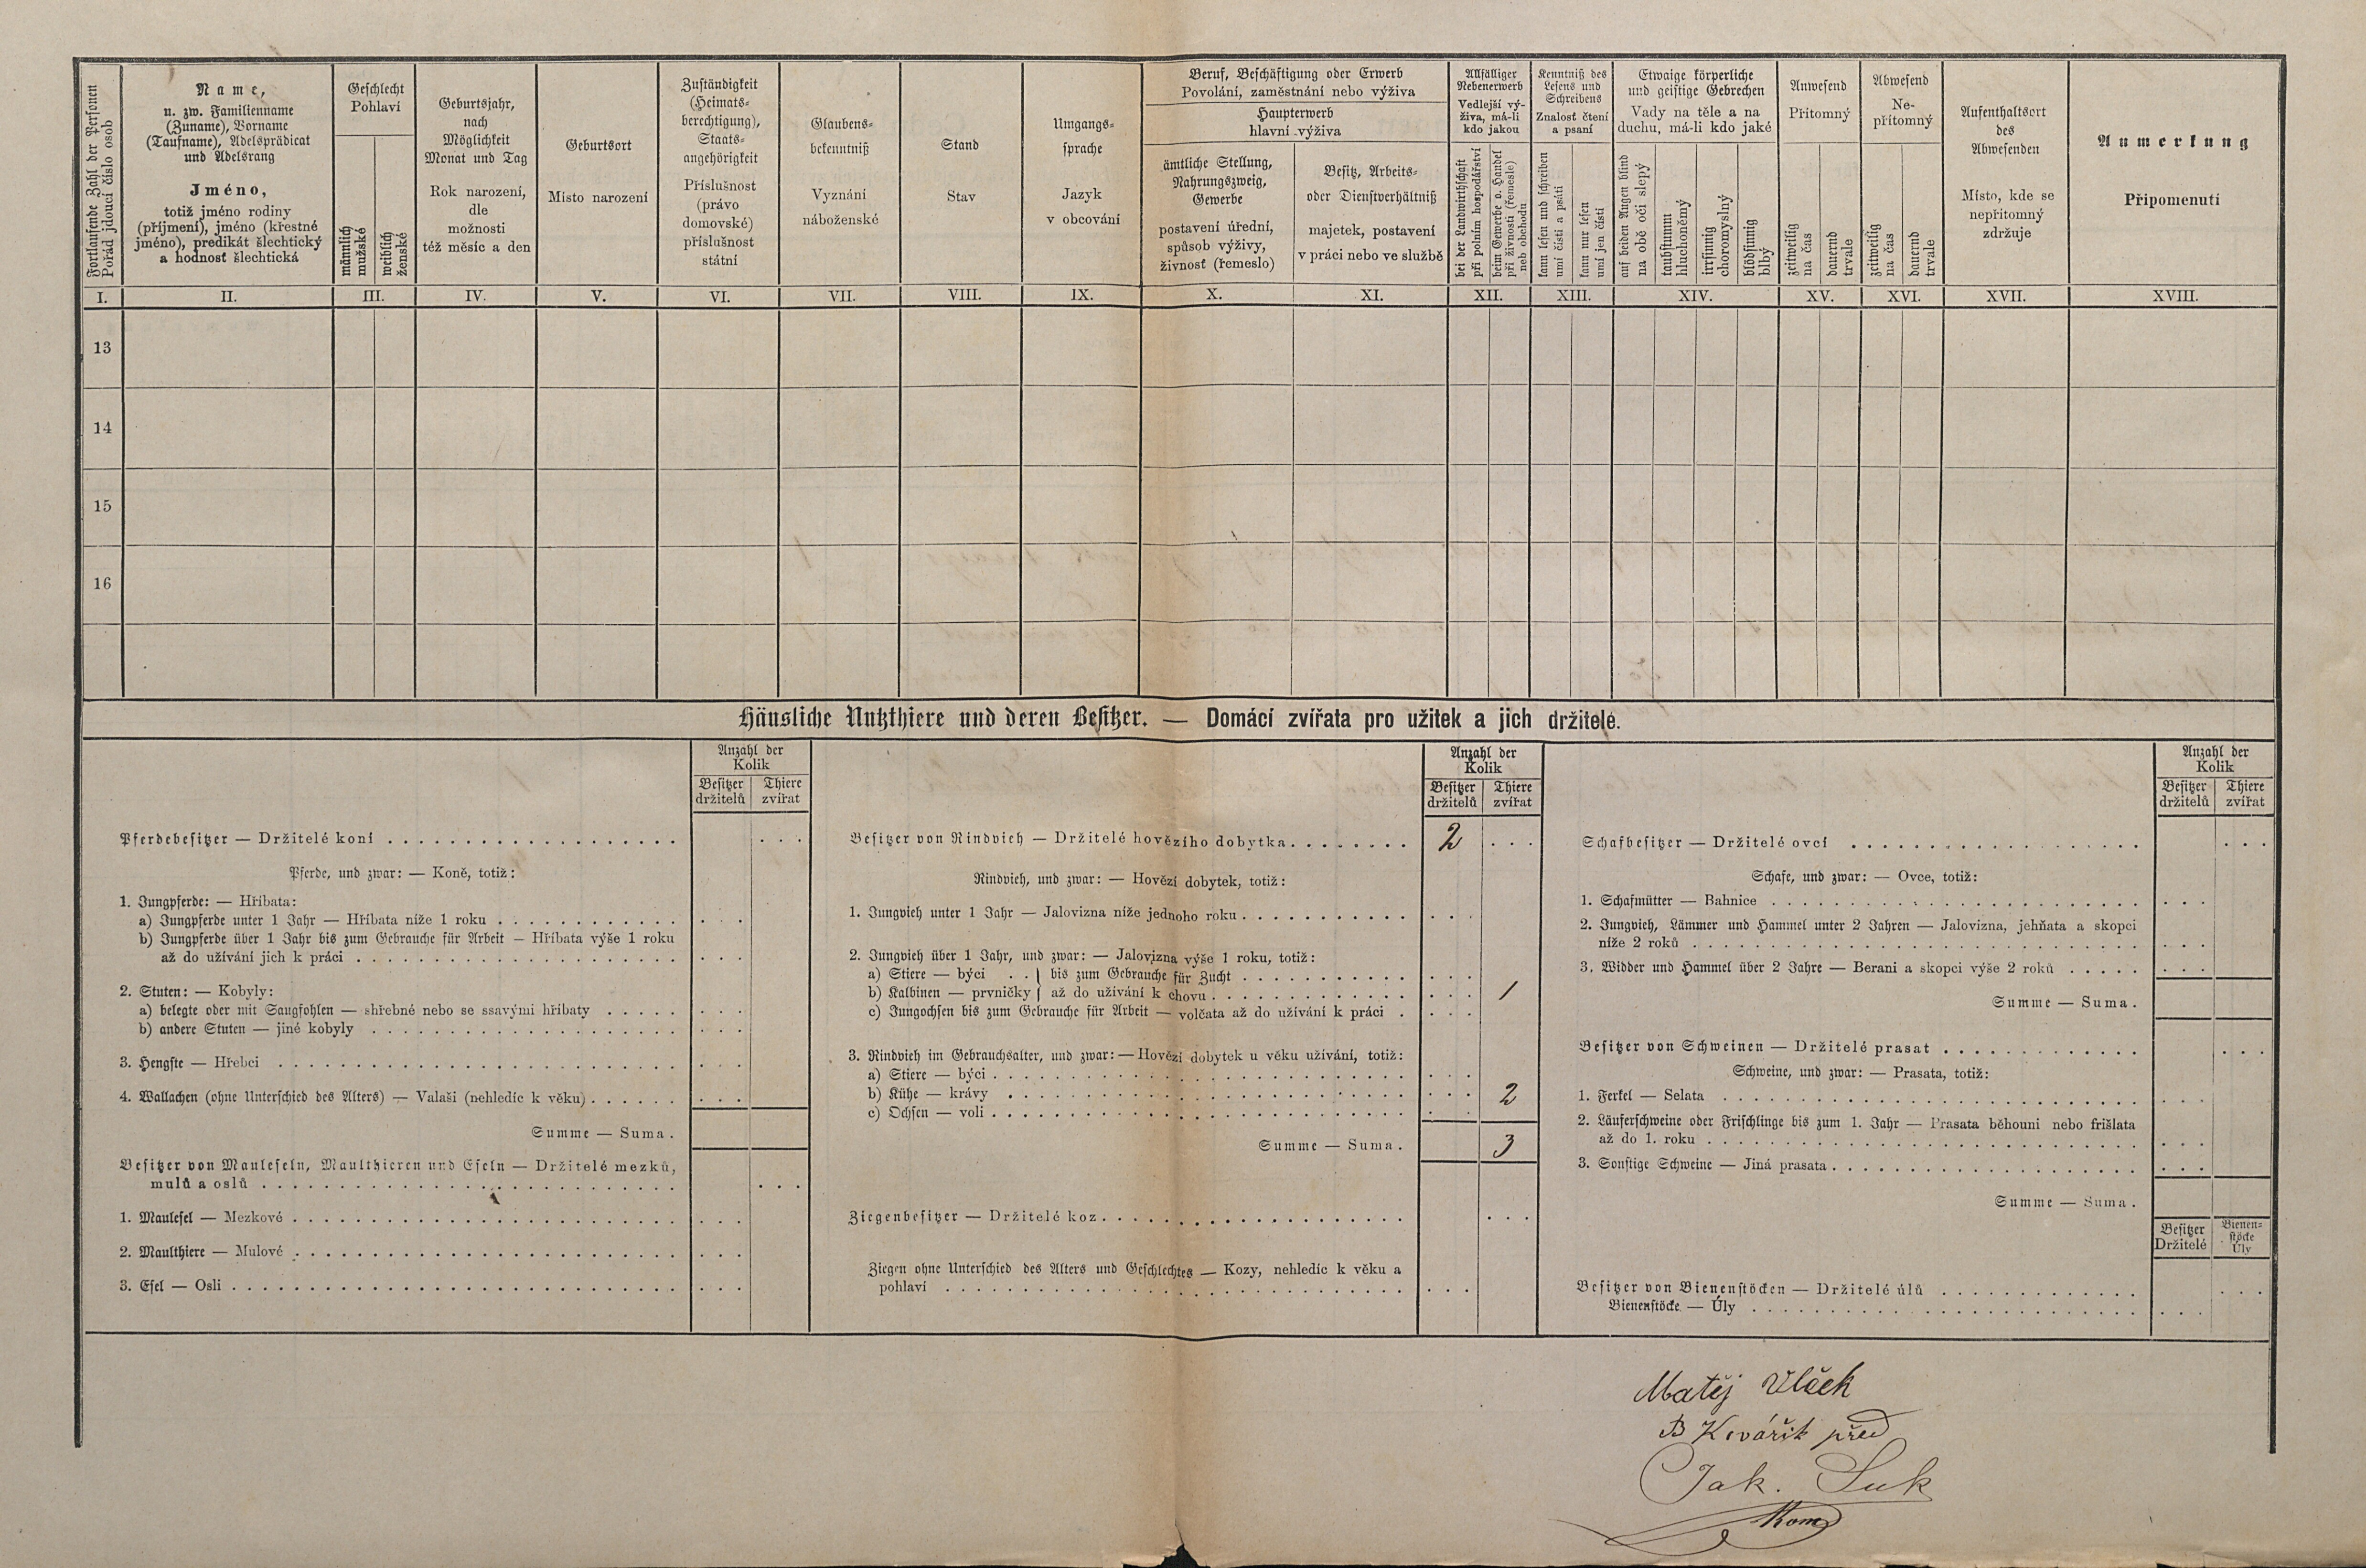 2. soap-kt_01159_census-1880-besiny-uloh-cp021_0020